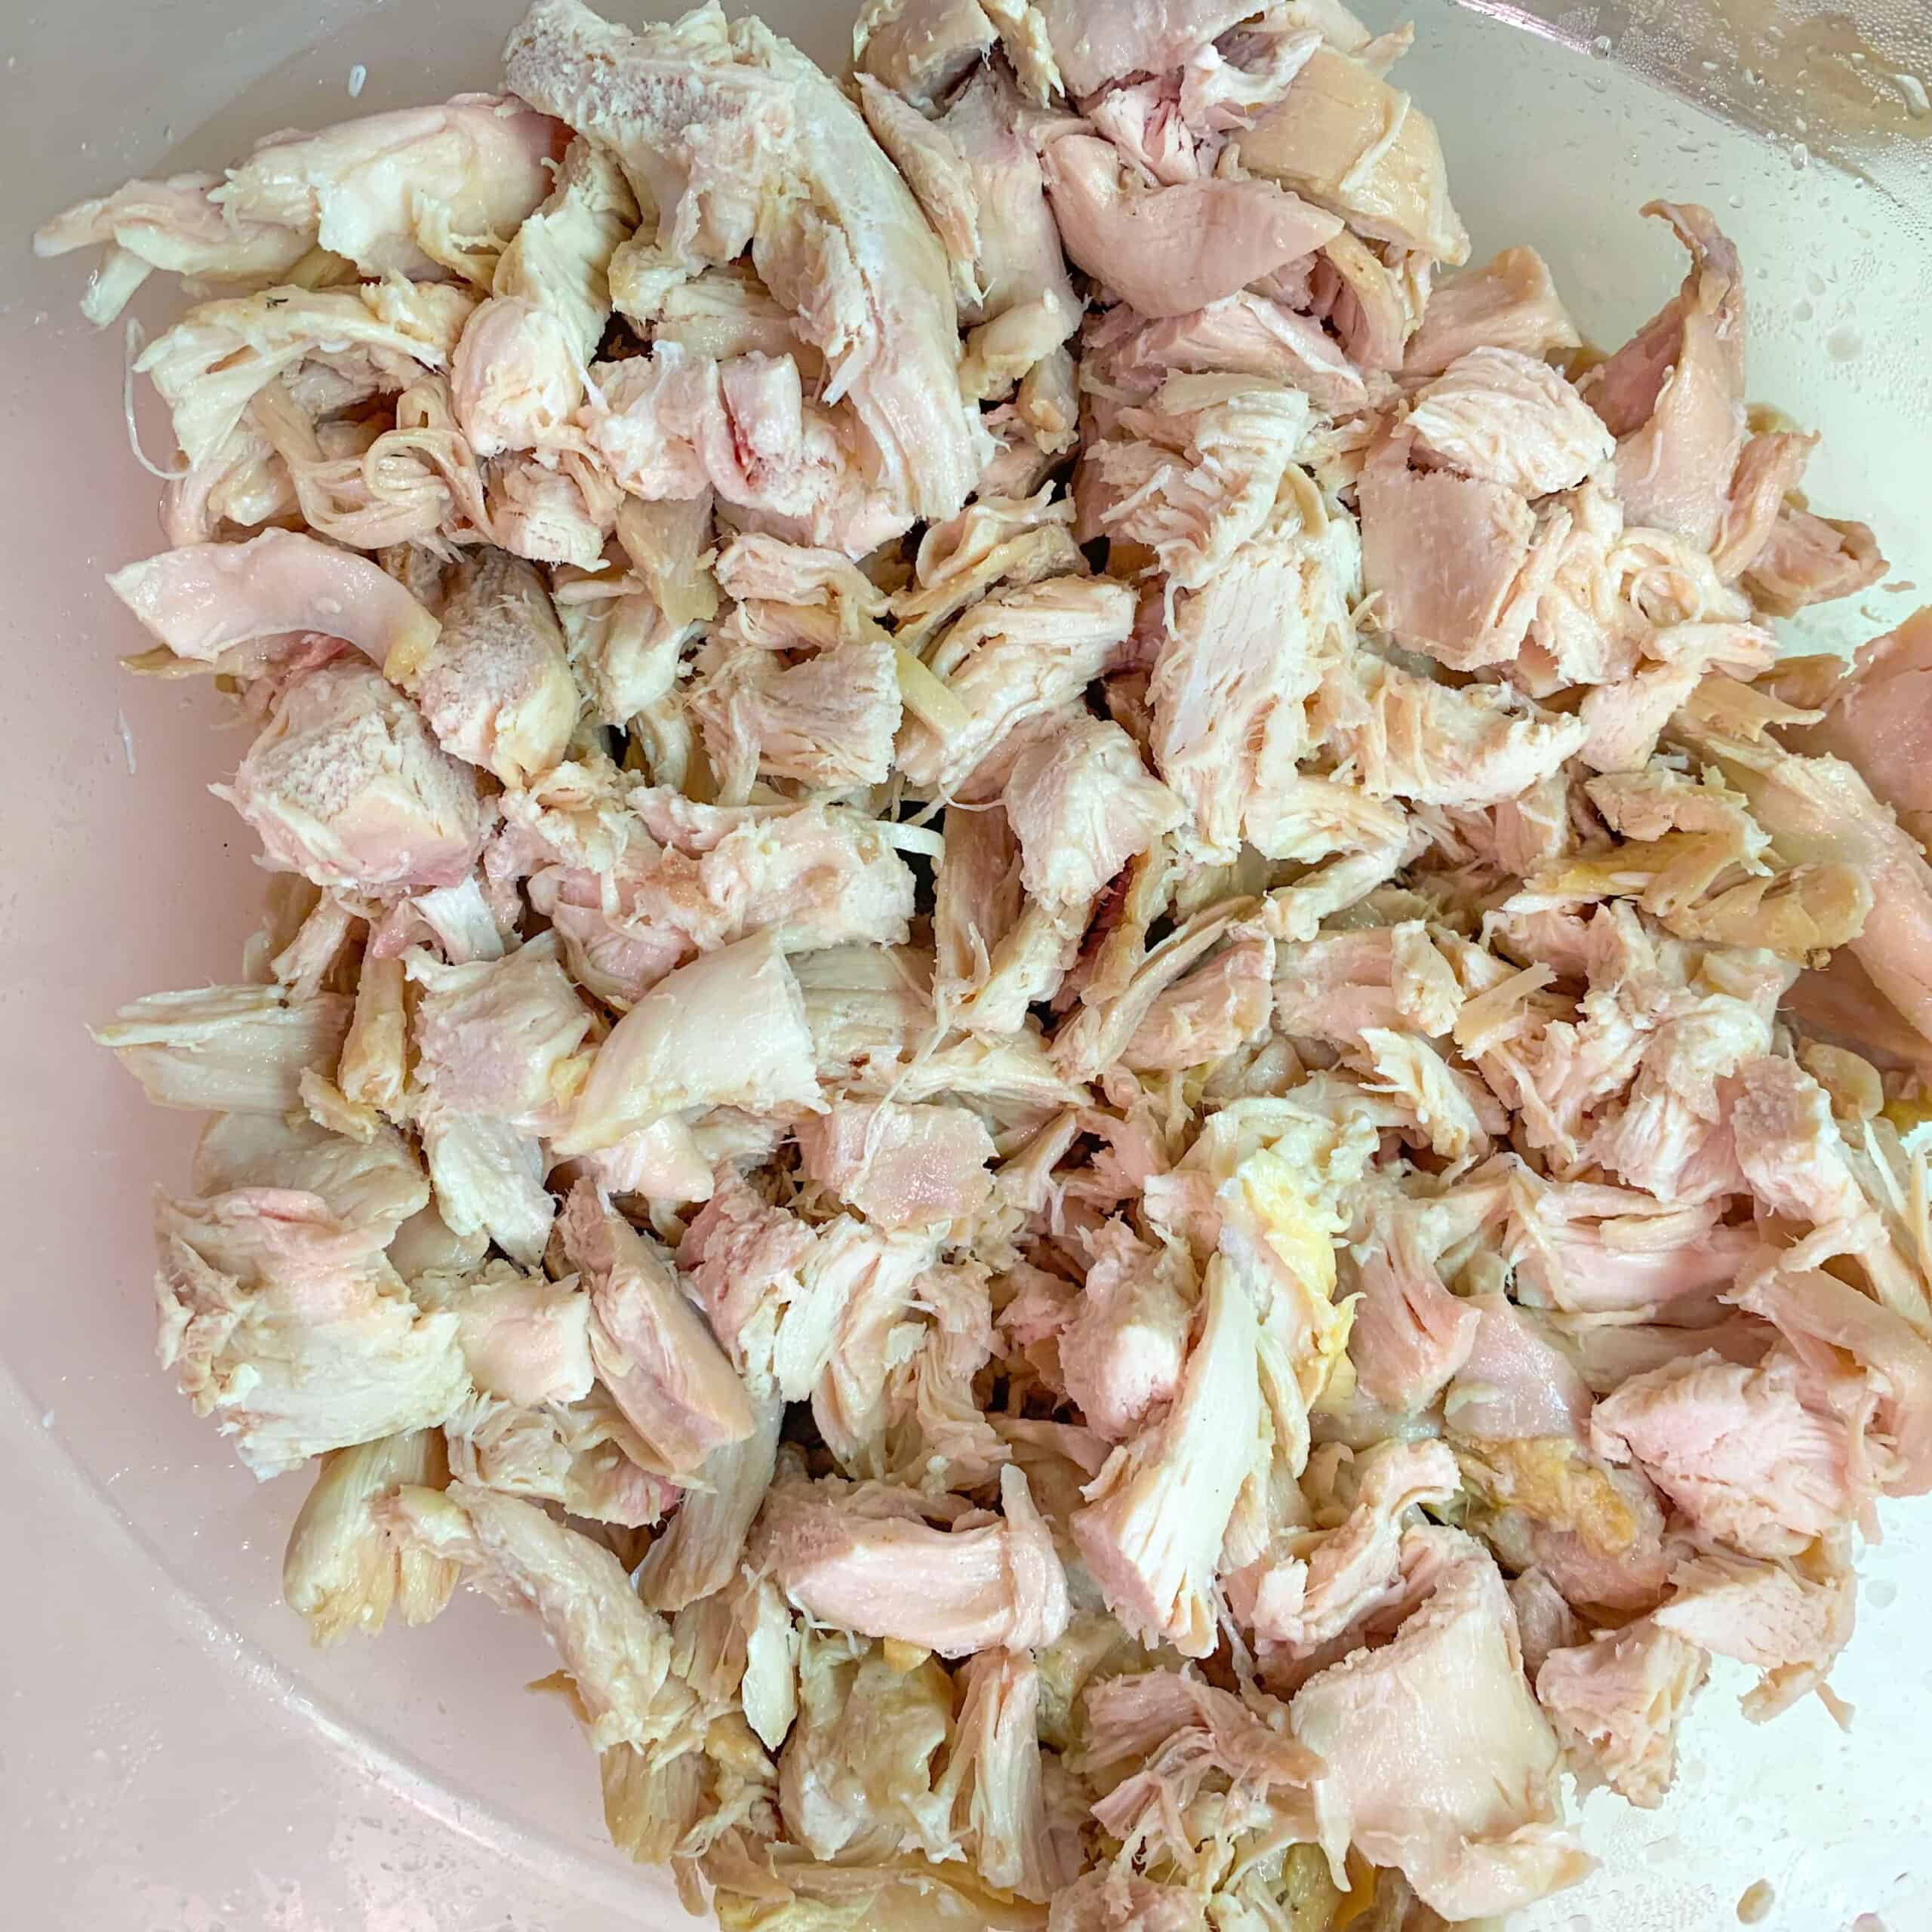 Plate of cooked shredded chicken